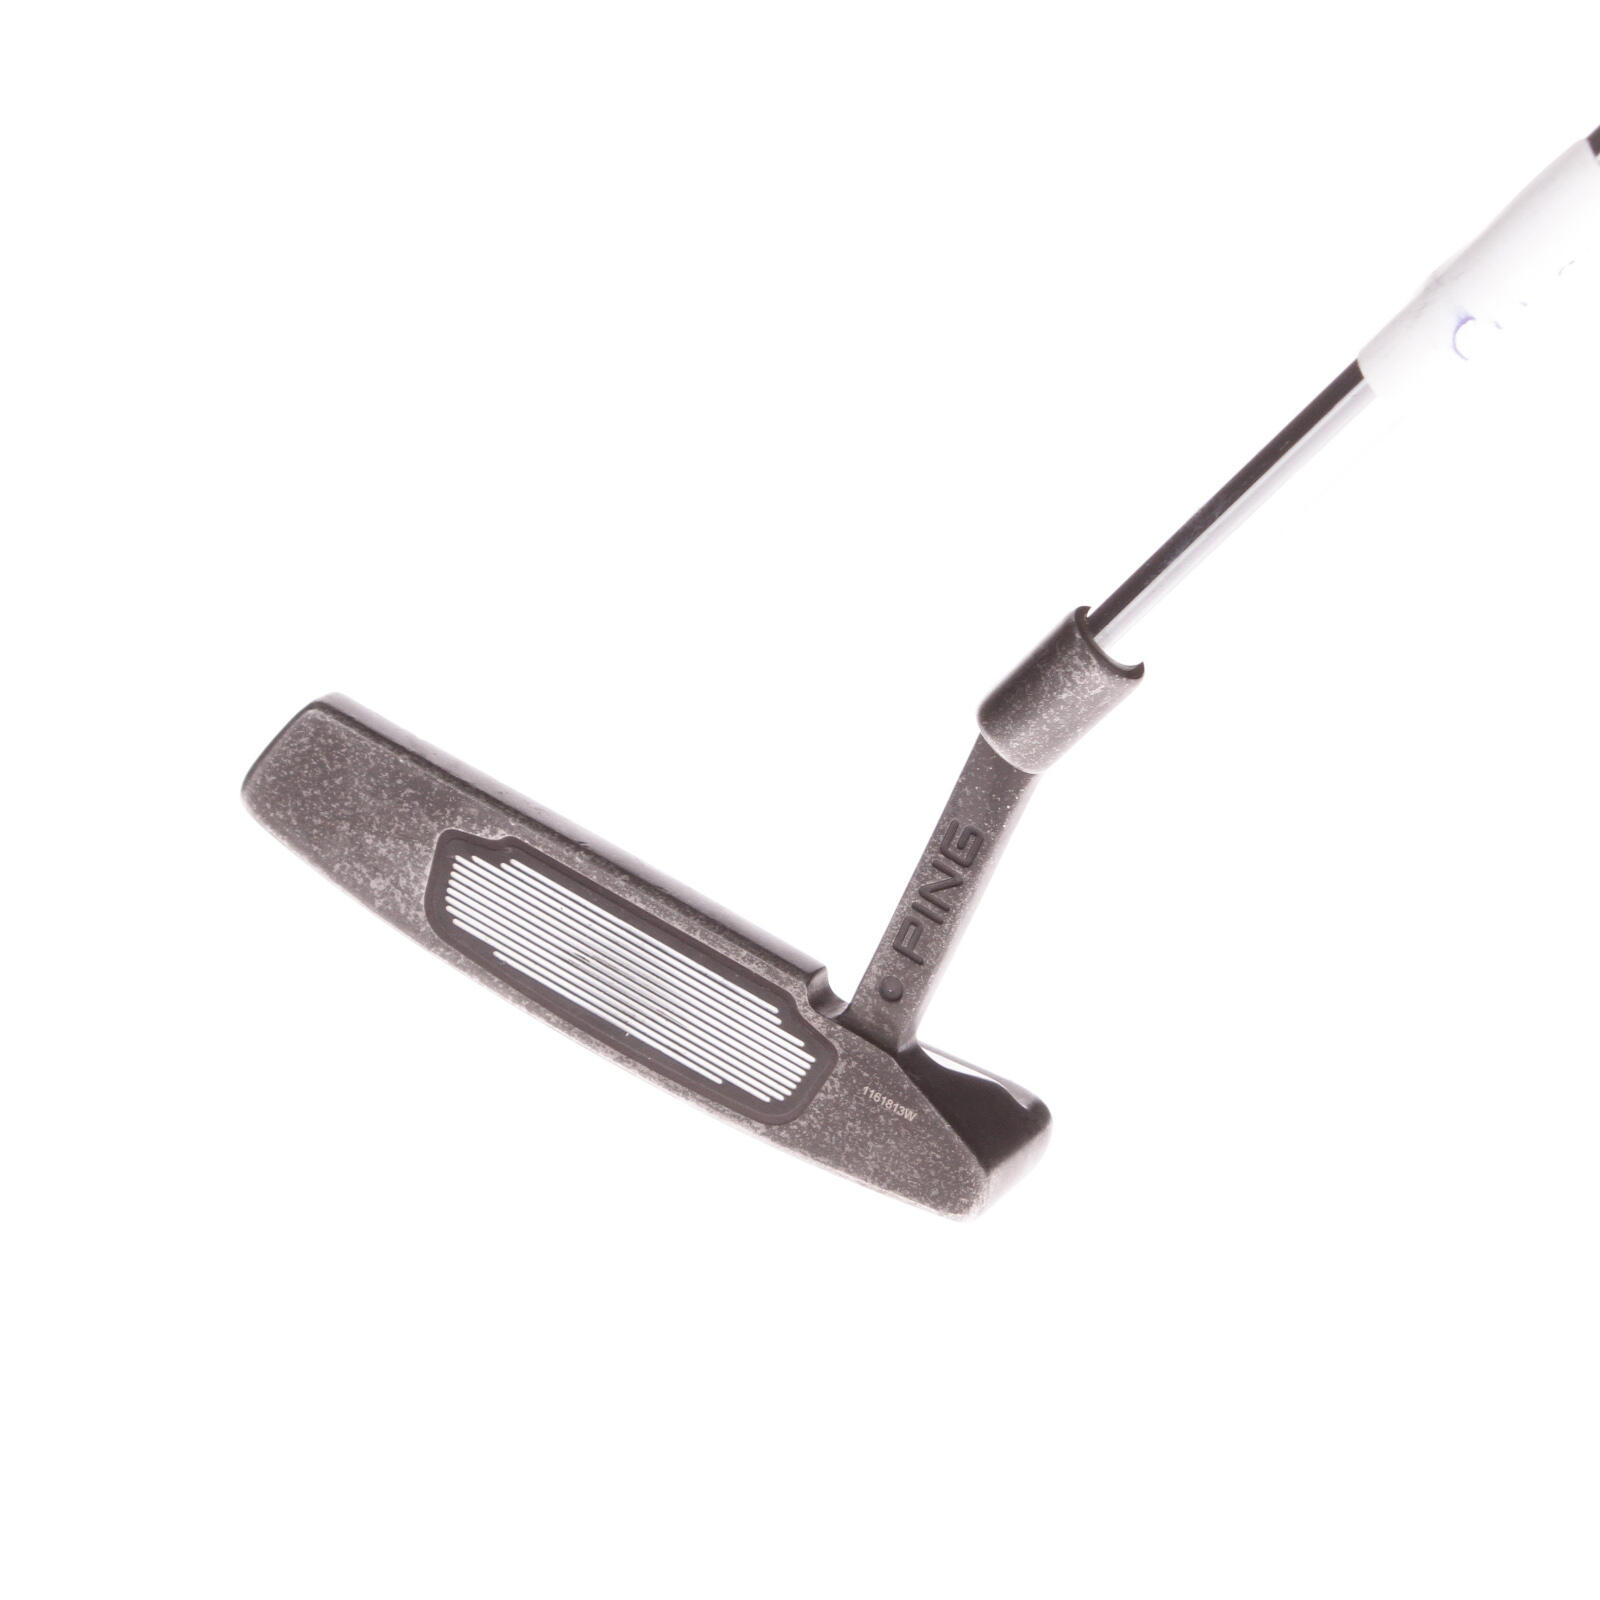 USED - Ping Scottsdale TR Putter 33.5 Inches Steel Shaft Right Handed - GRADE C 3/6